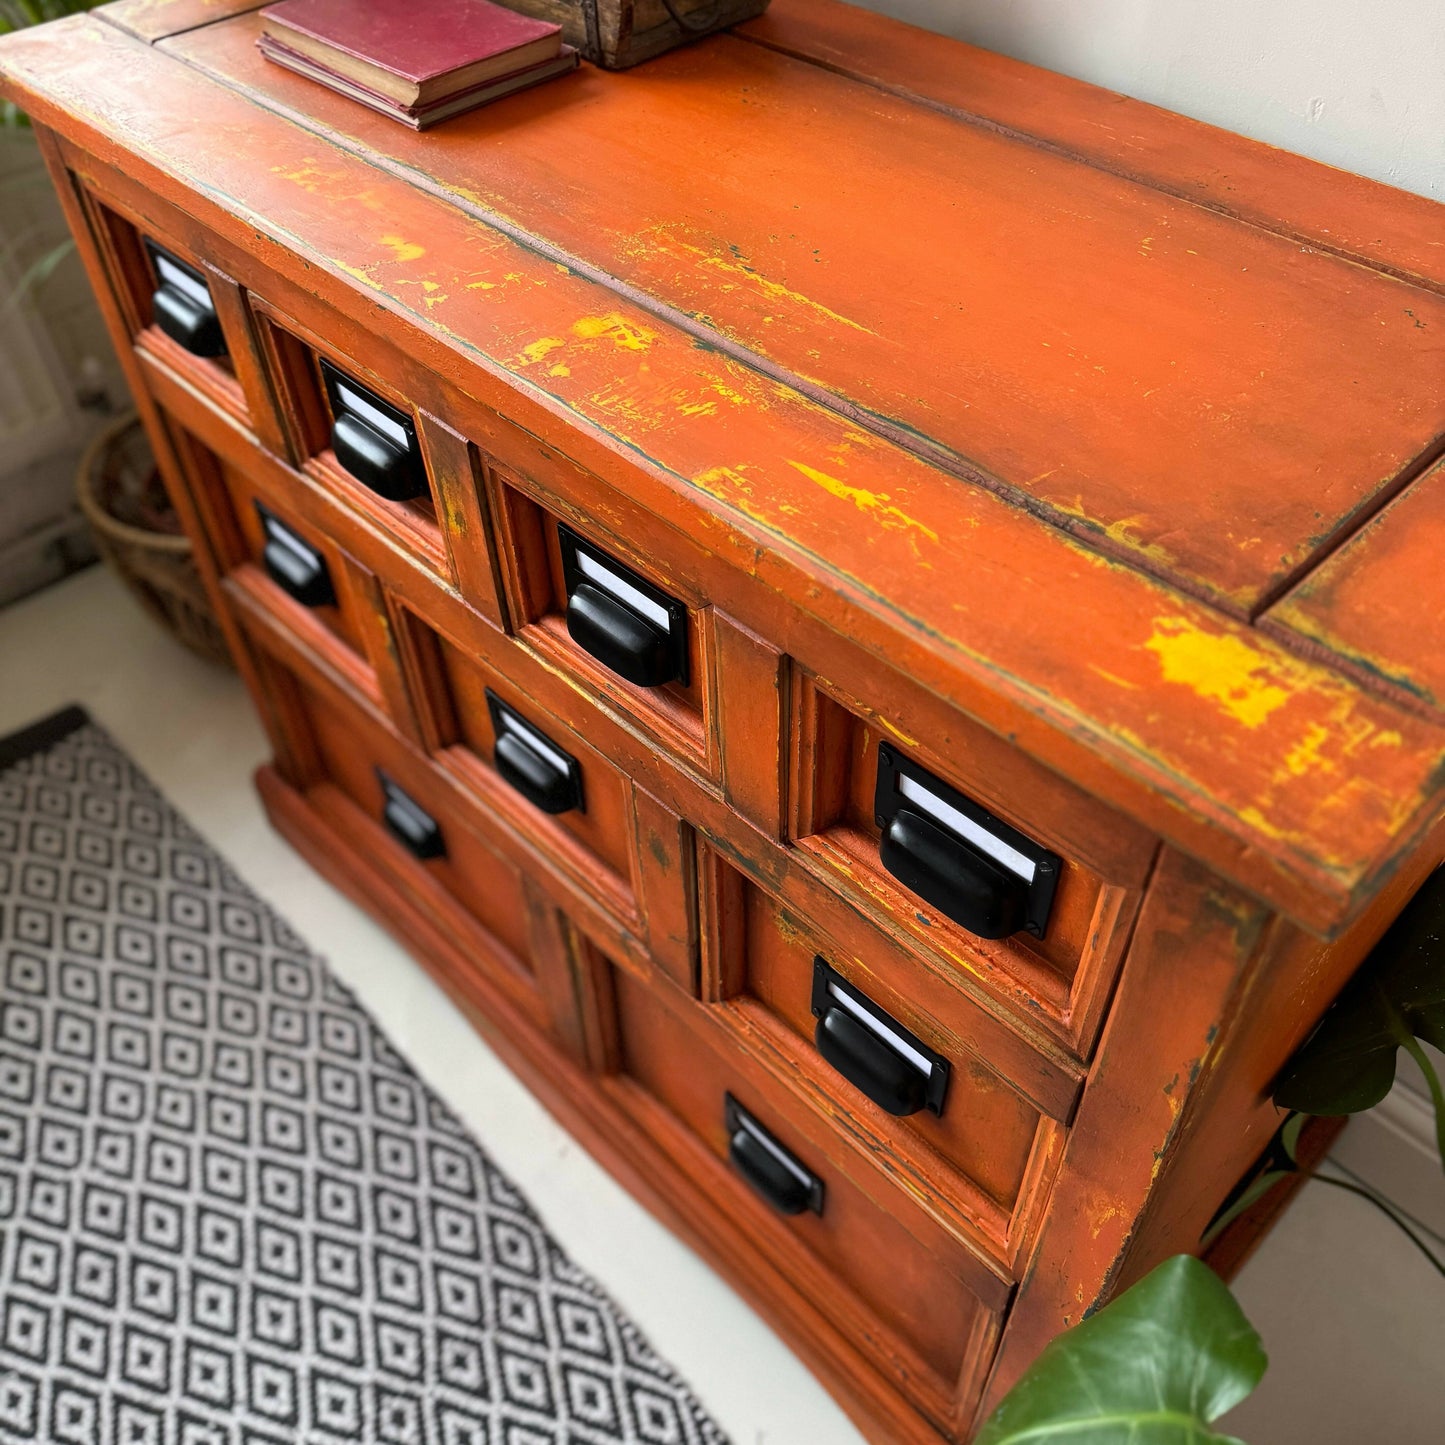 Merchants Chest of Drawers